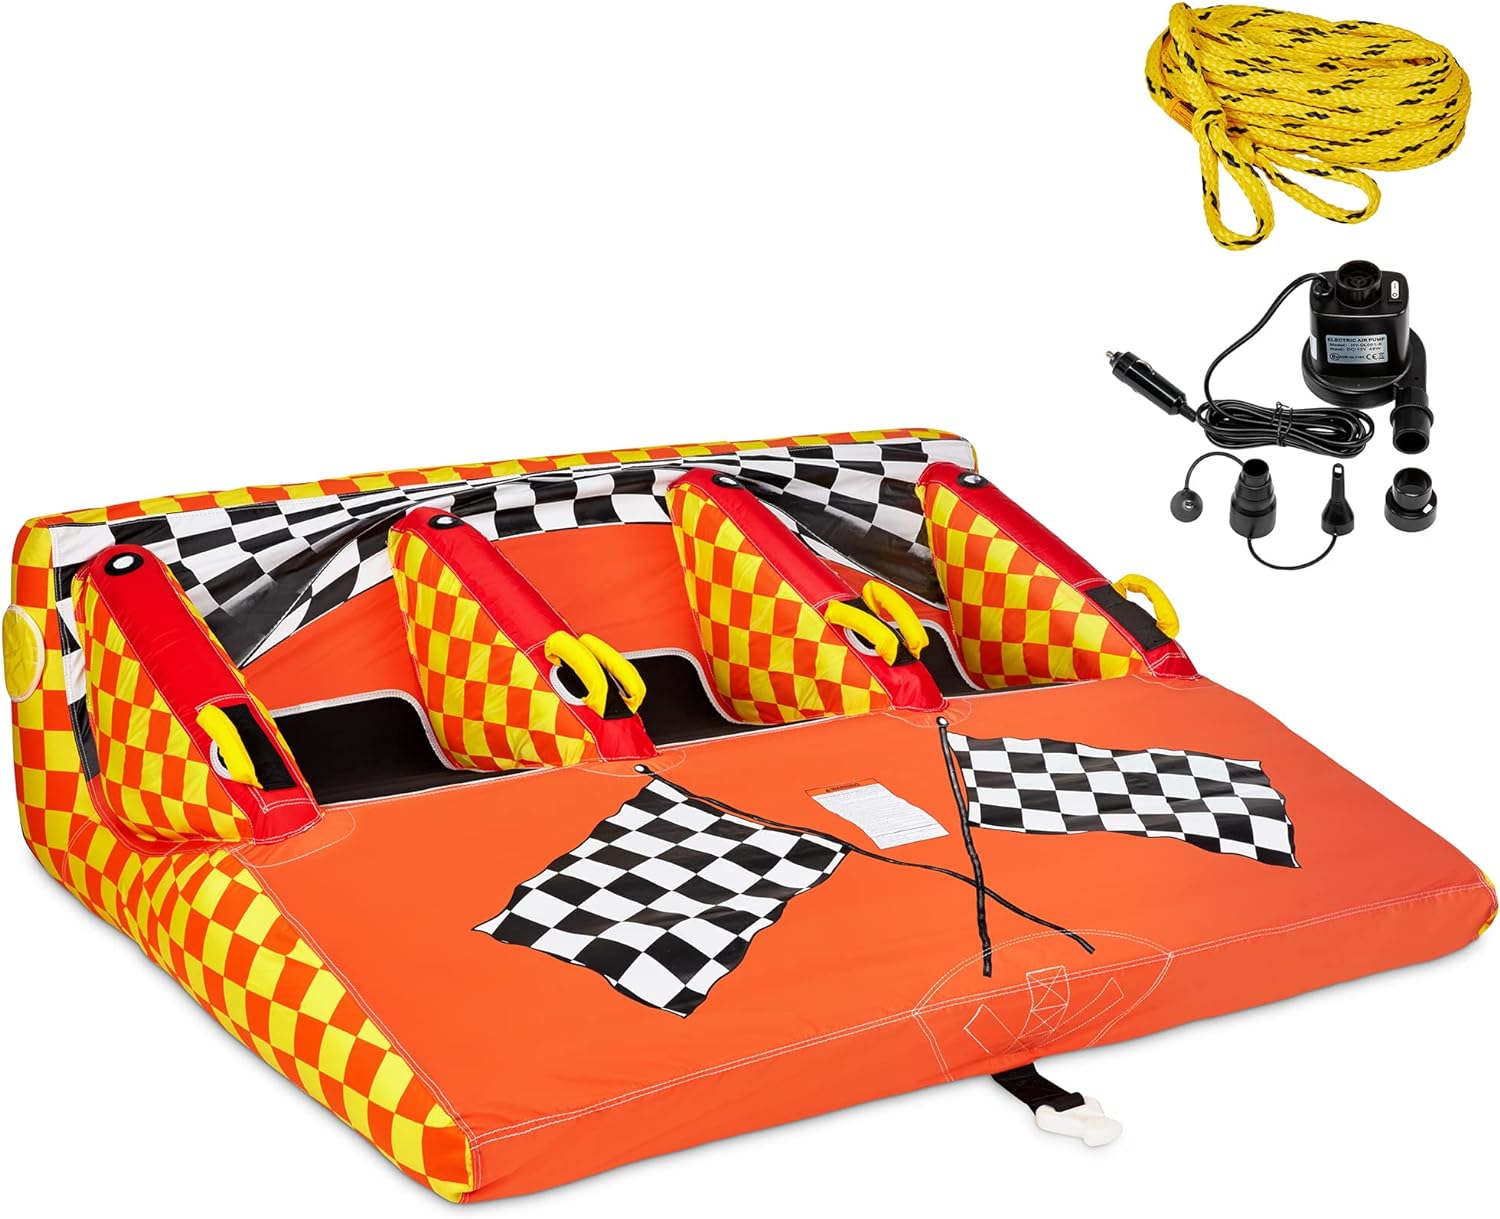 Towable Water Tube | 2  3 Person Inflatable Floating Raft for Boating with Cushion Seats, Grip Handles, Dual Tow Points  Speed Safety Valve For Fast Inflation | 12V Air Pump  Tow Rope Included